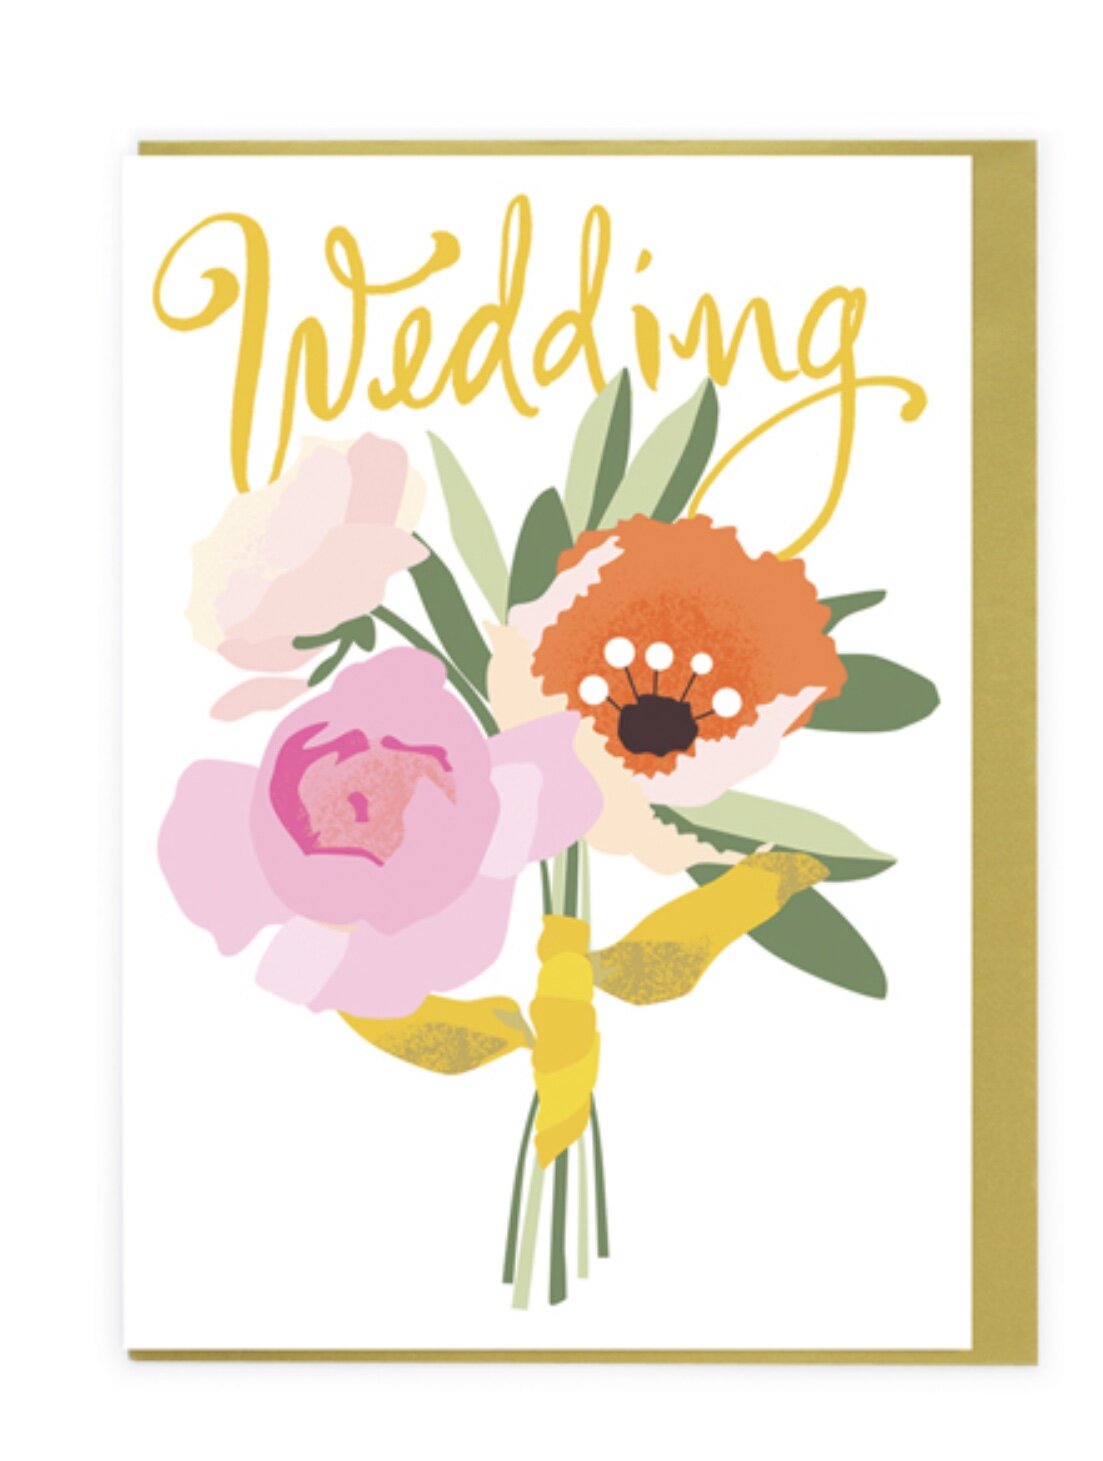 WEDDING (BUNCH OF FLOWERS) | CARD BY NOI